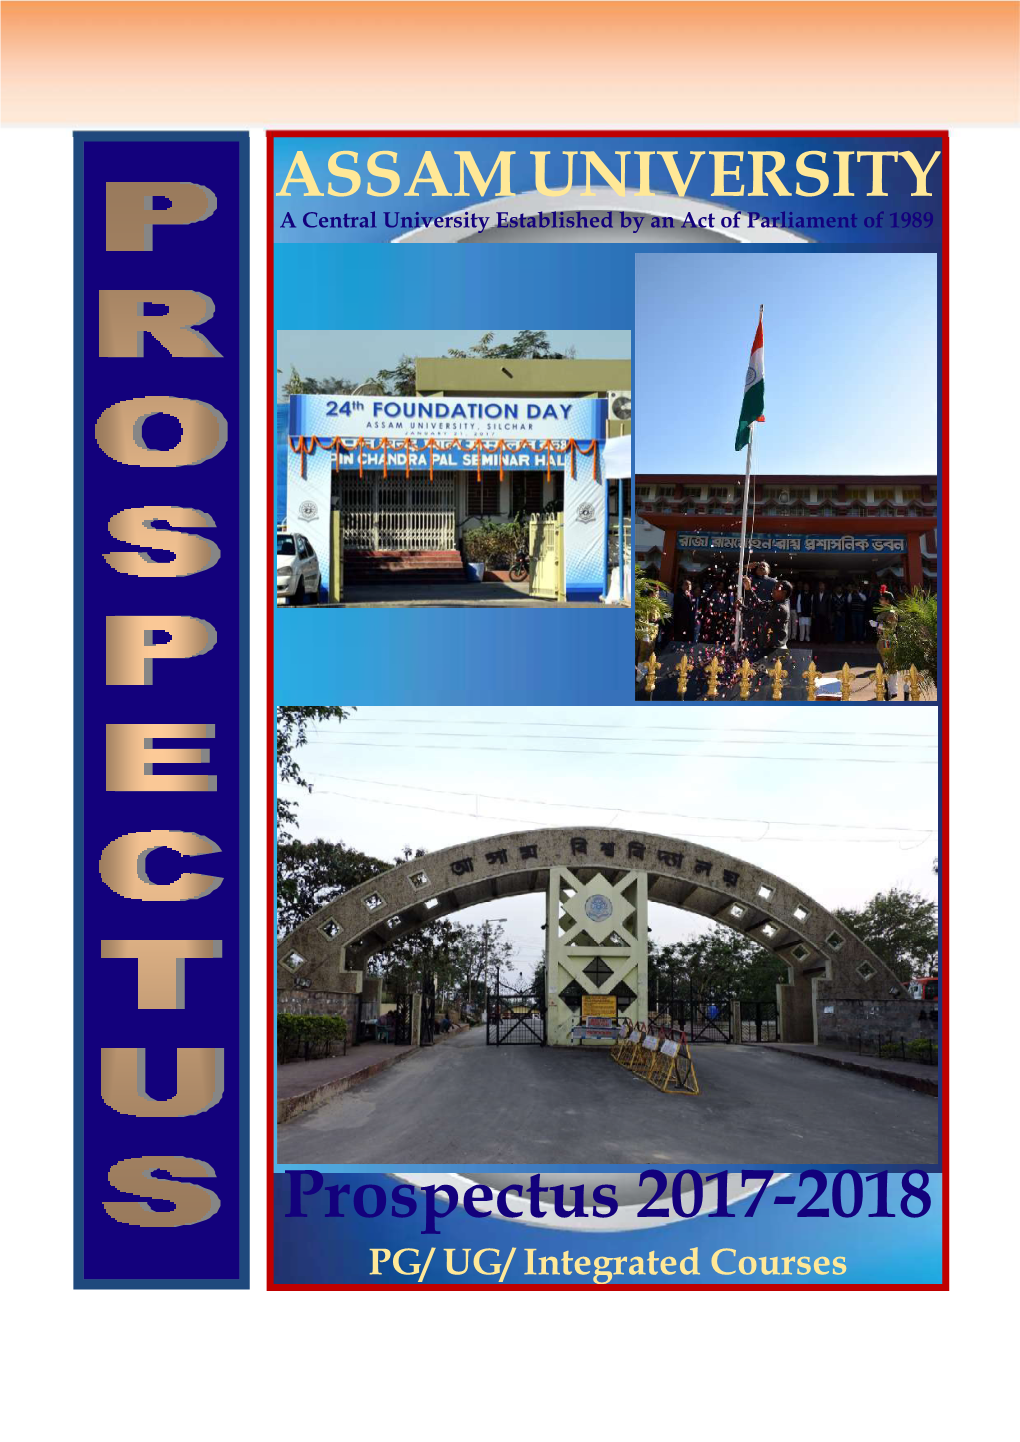 Prospectus 2017-2018 PG/ UG/ Integrated Courses UNIVERSITY ADMINISTRATION